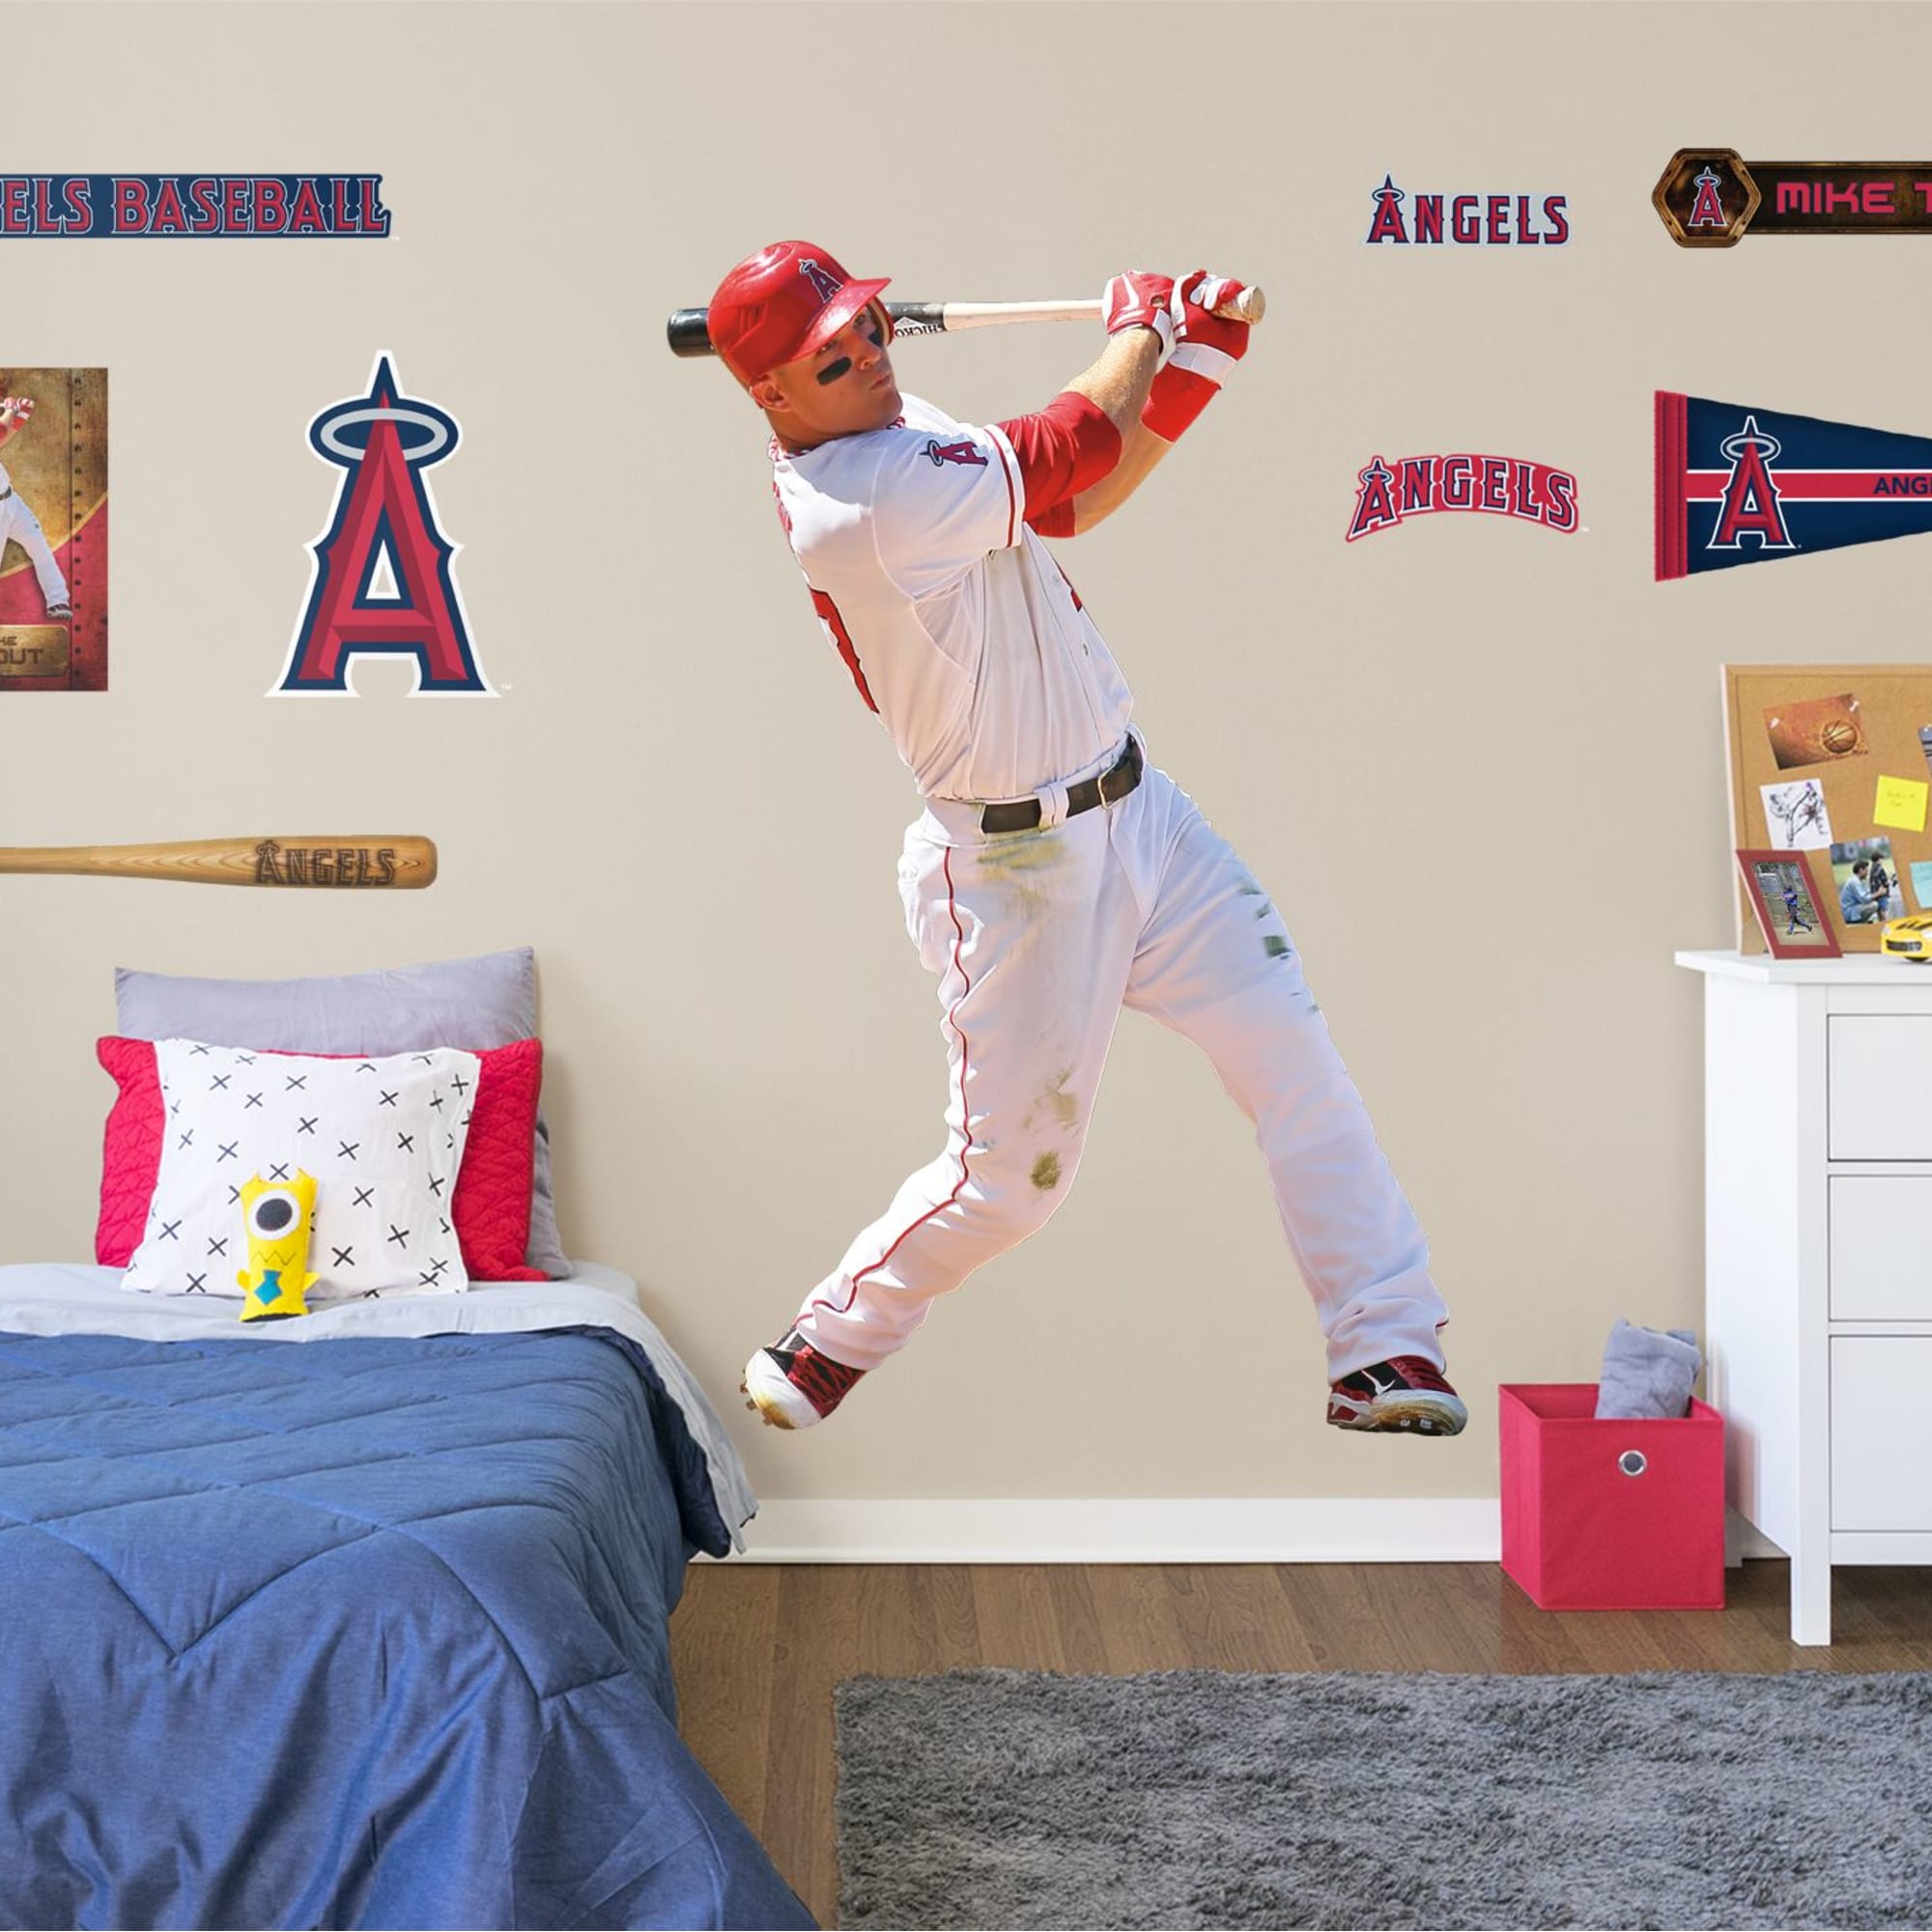 Mike Trout for LA Angels - Officially Licensed MLB Removable Wall Decal XL by Fathead | Vinyl